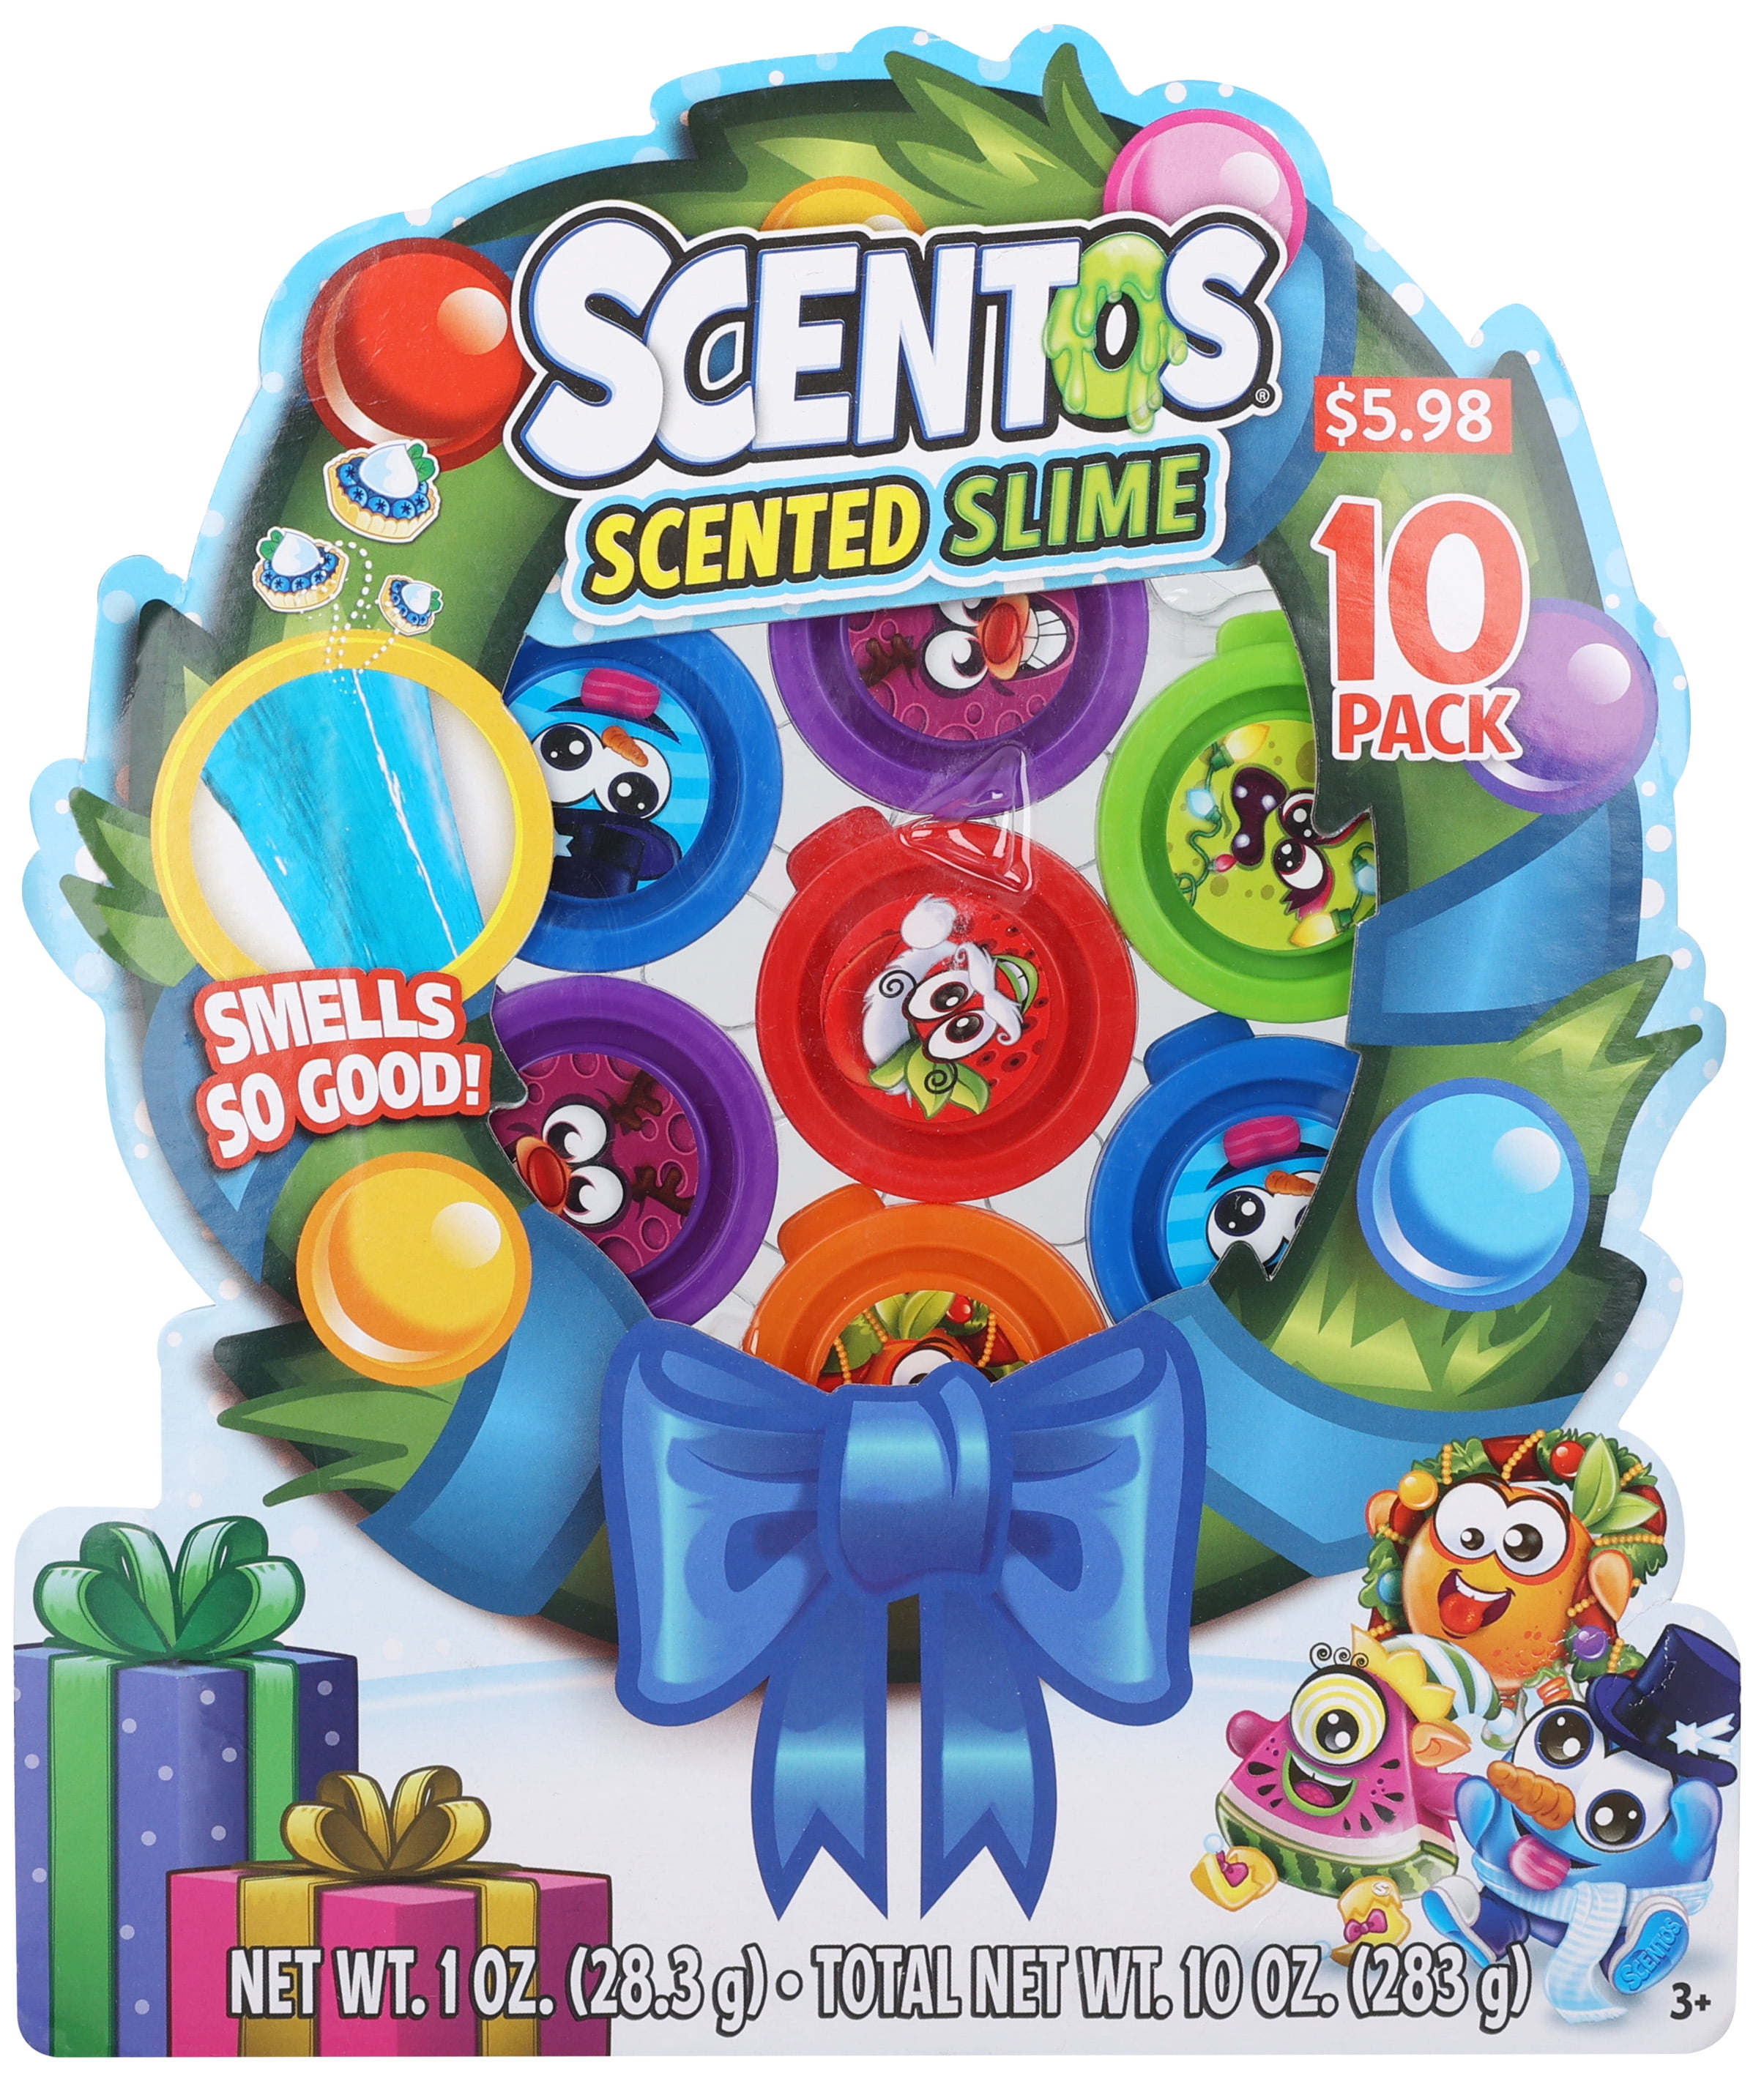 Scentos Scented Brightly Colored 10-1oz Slime Tubs - Great Party Favor, Ages 3+